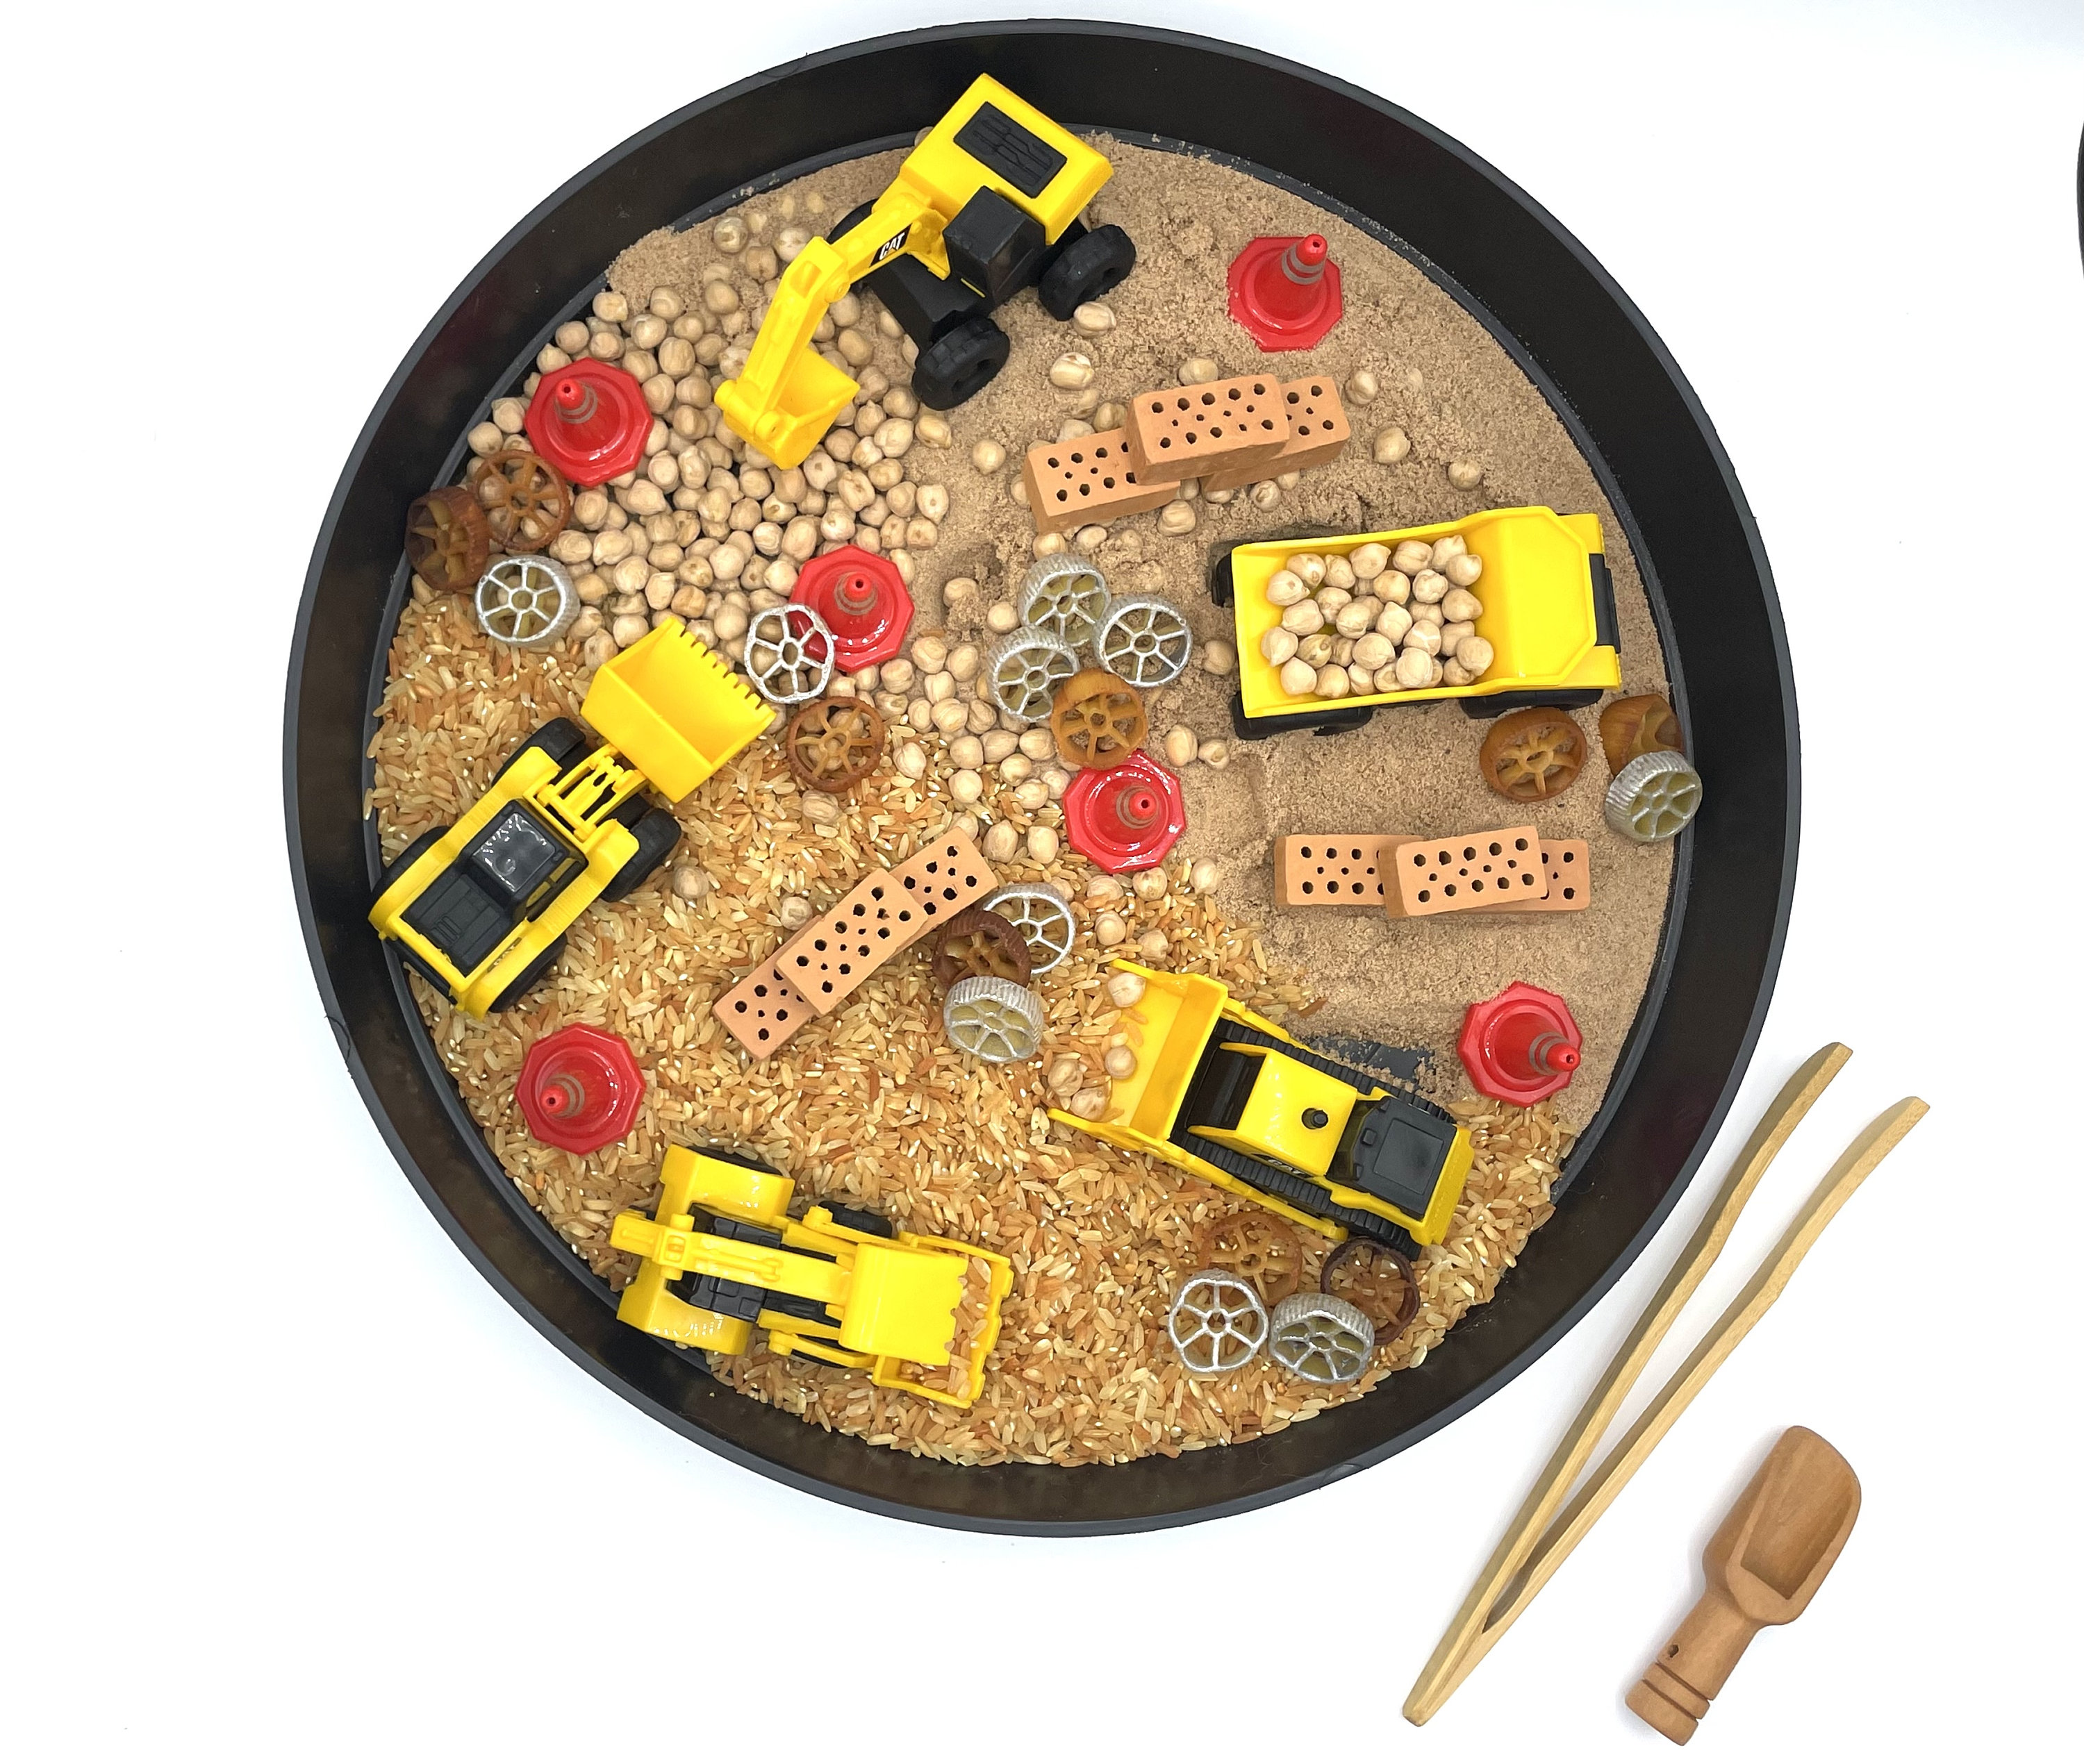 Construction Sensory Play Tray Kit Messy Play Building Site Tray Digger Toy Tuff  Tray Sensory Base Gift for Kids Toddler Present 